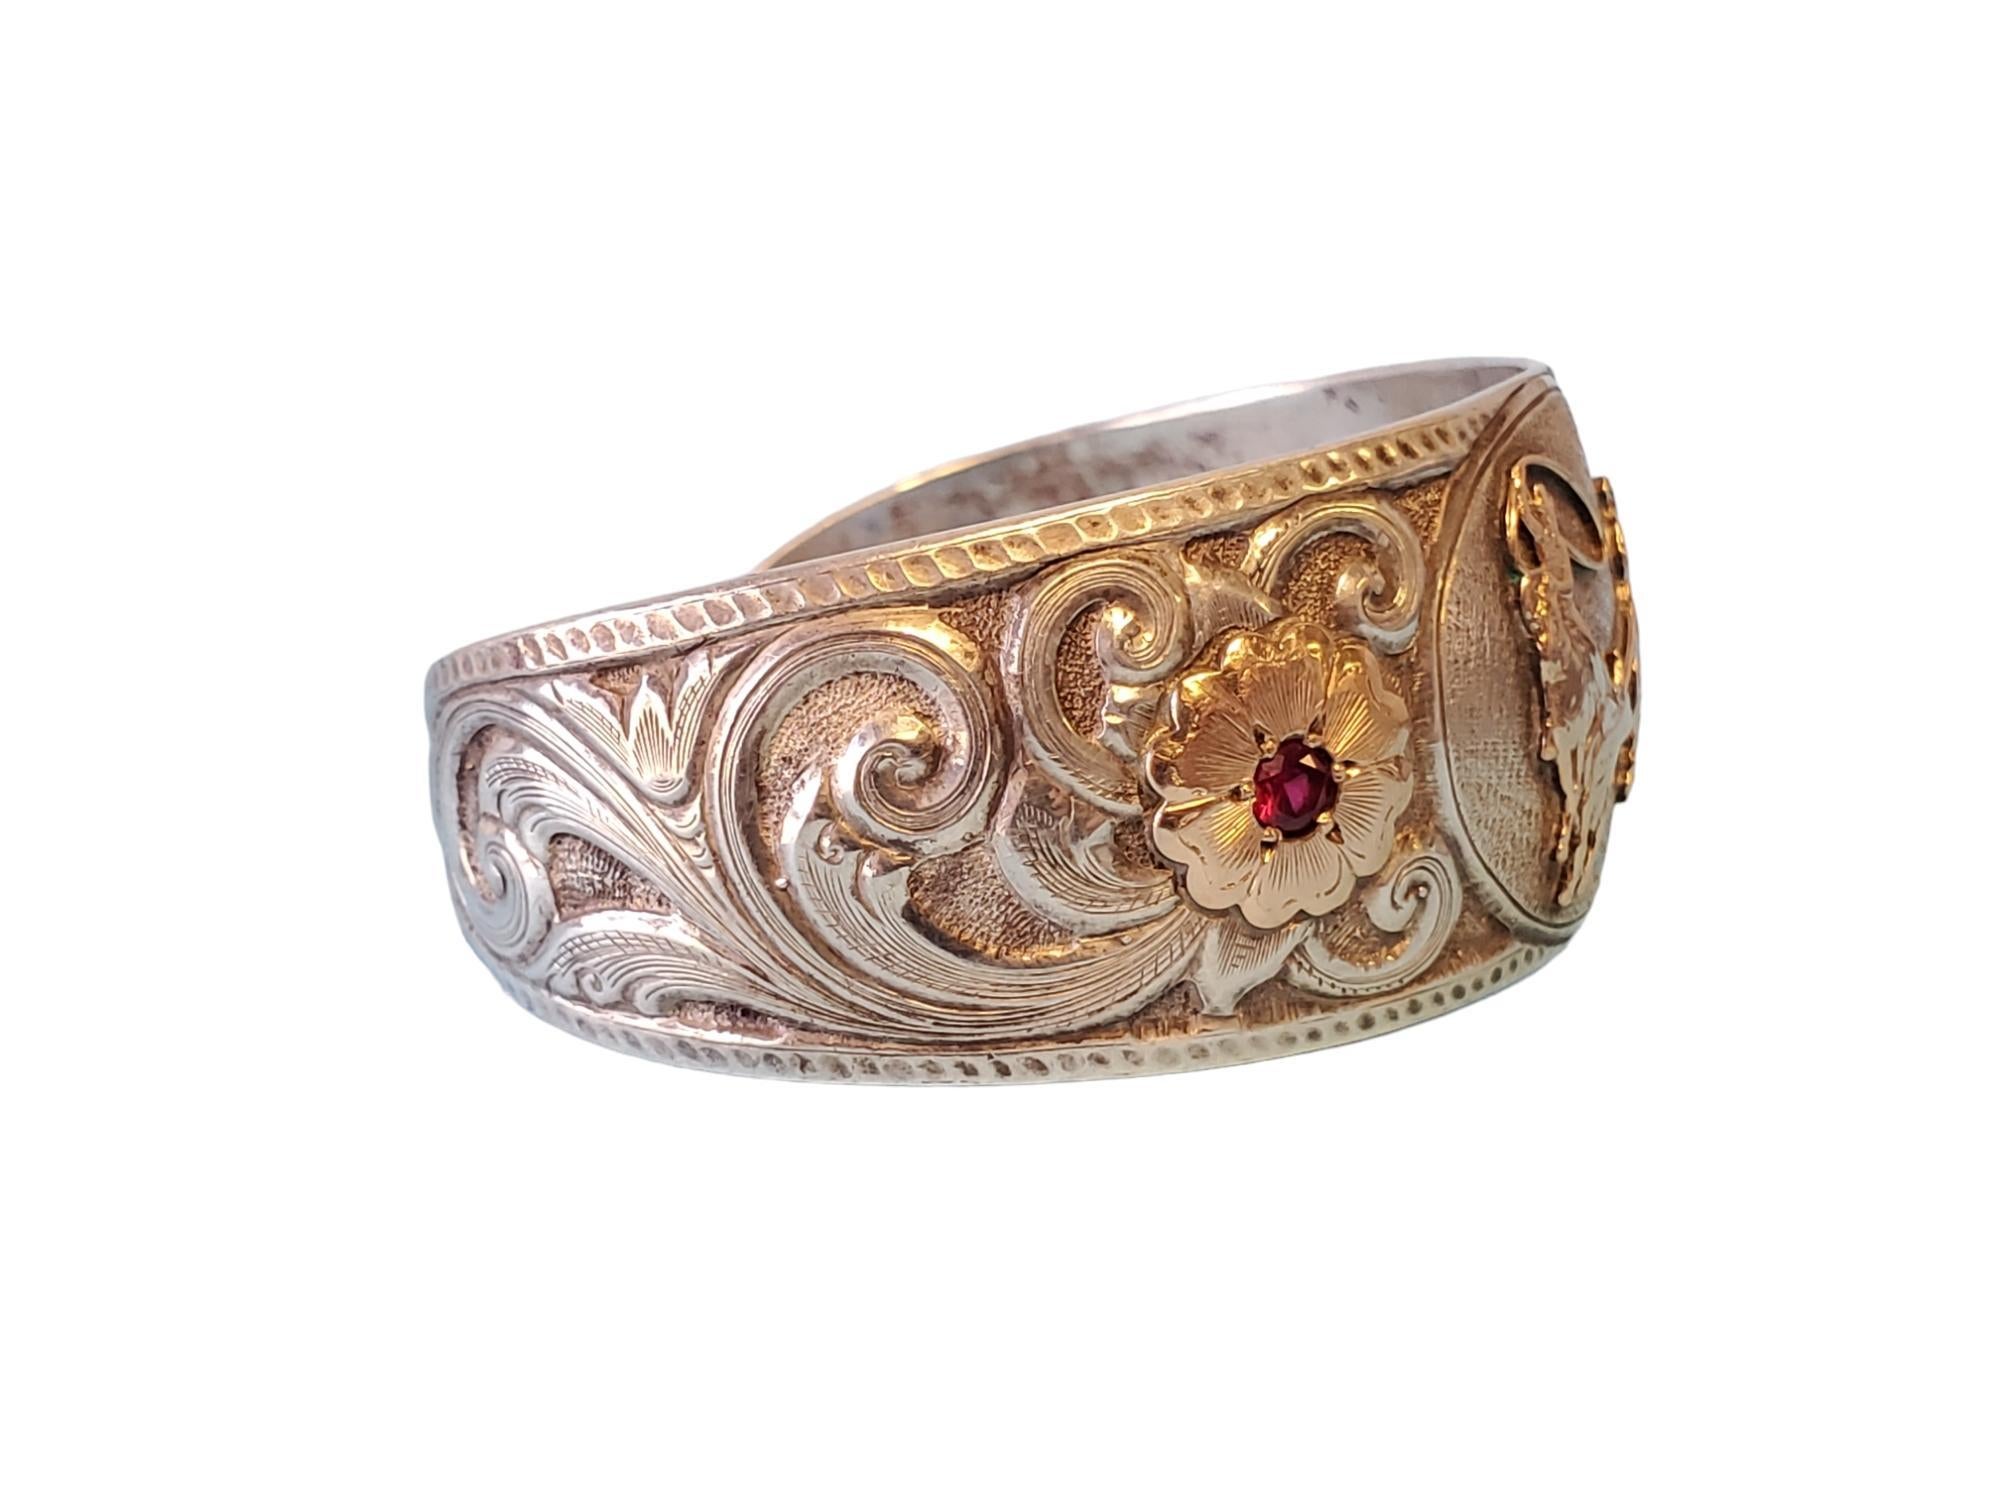 Vintage Gist Signed Sterling Cuff Bracelet Cowboy Motif with gold accents In Good Condition For Sale In Overland Park, KS